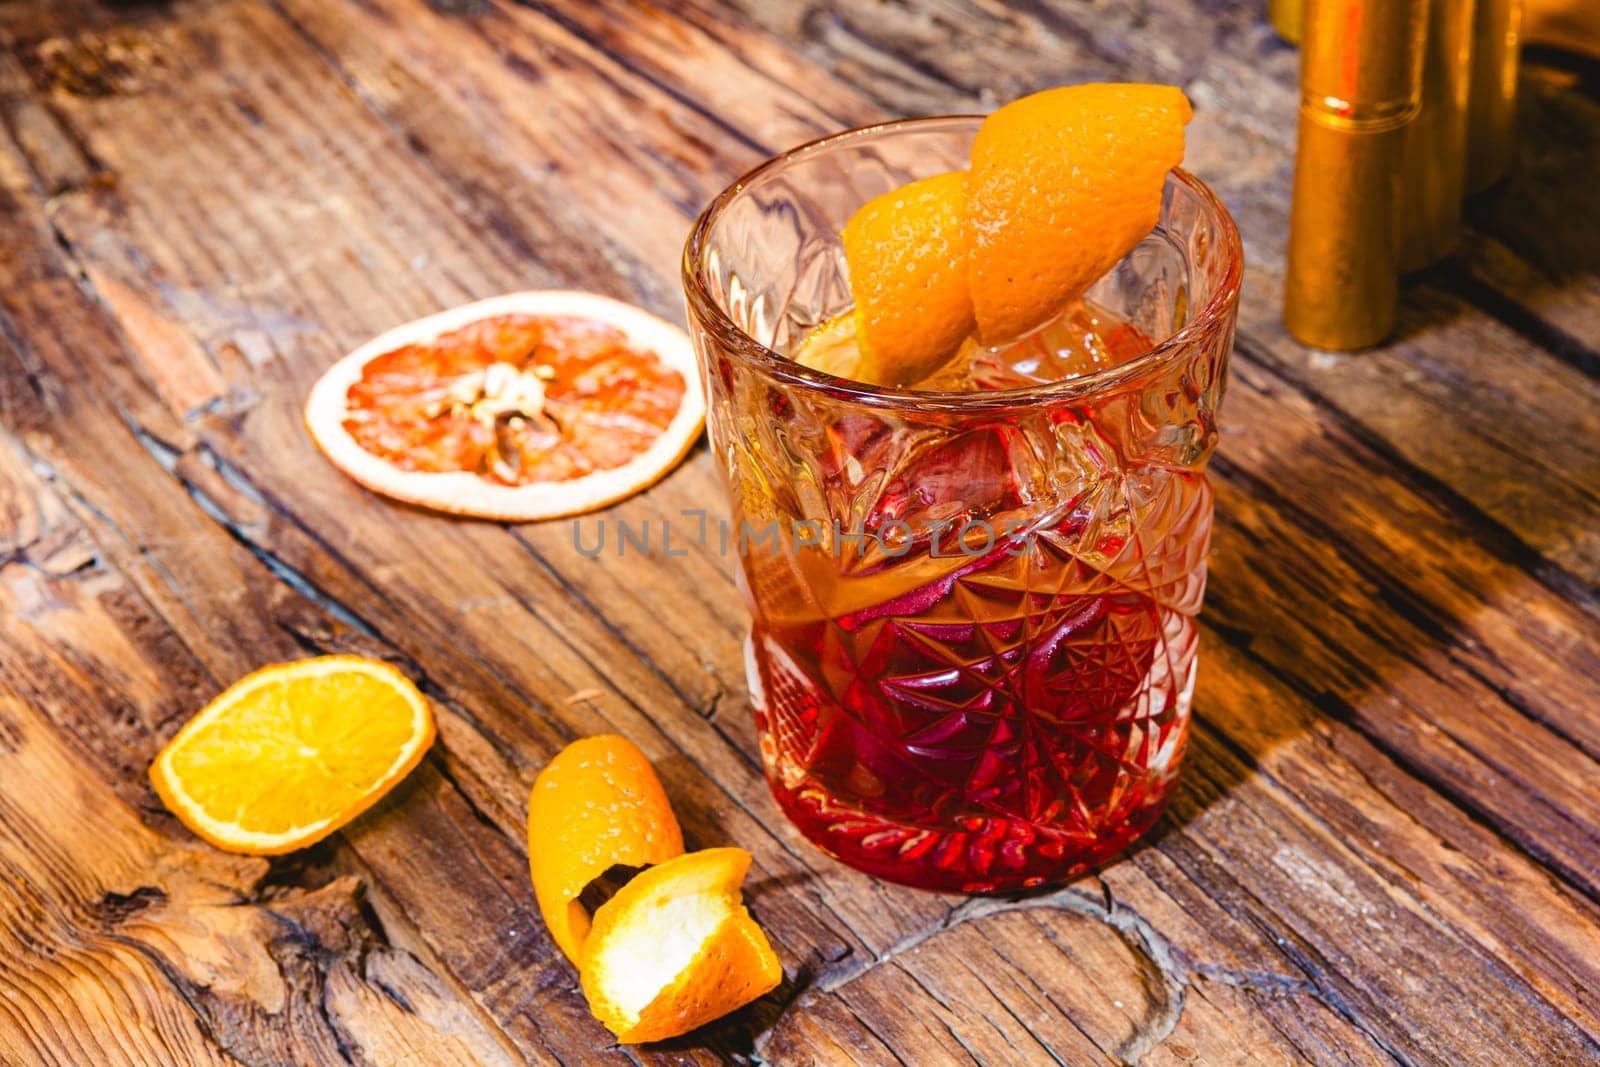 Delicious old fashion cocktail in the etched glass with ice and orange slices, dark wooden background. Shallow dof by sarymsakov